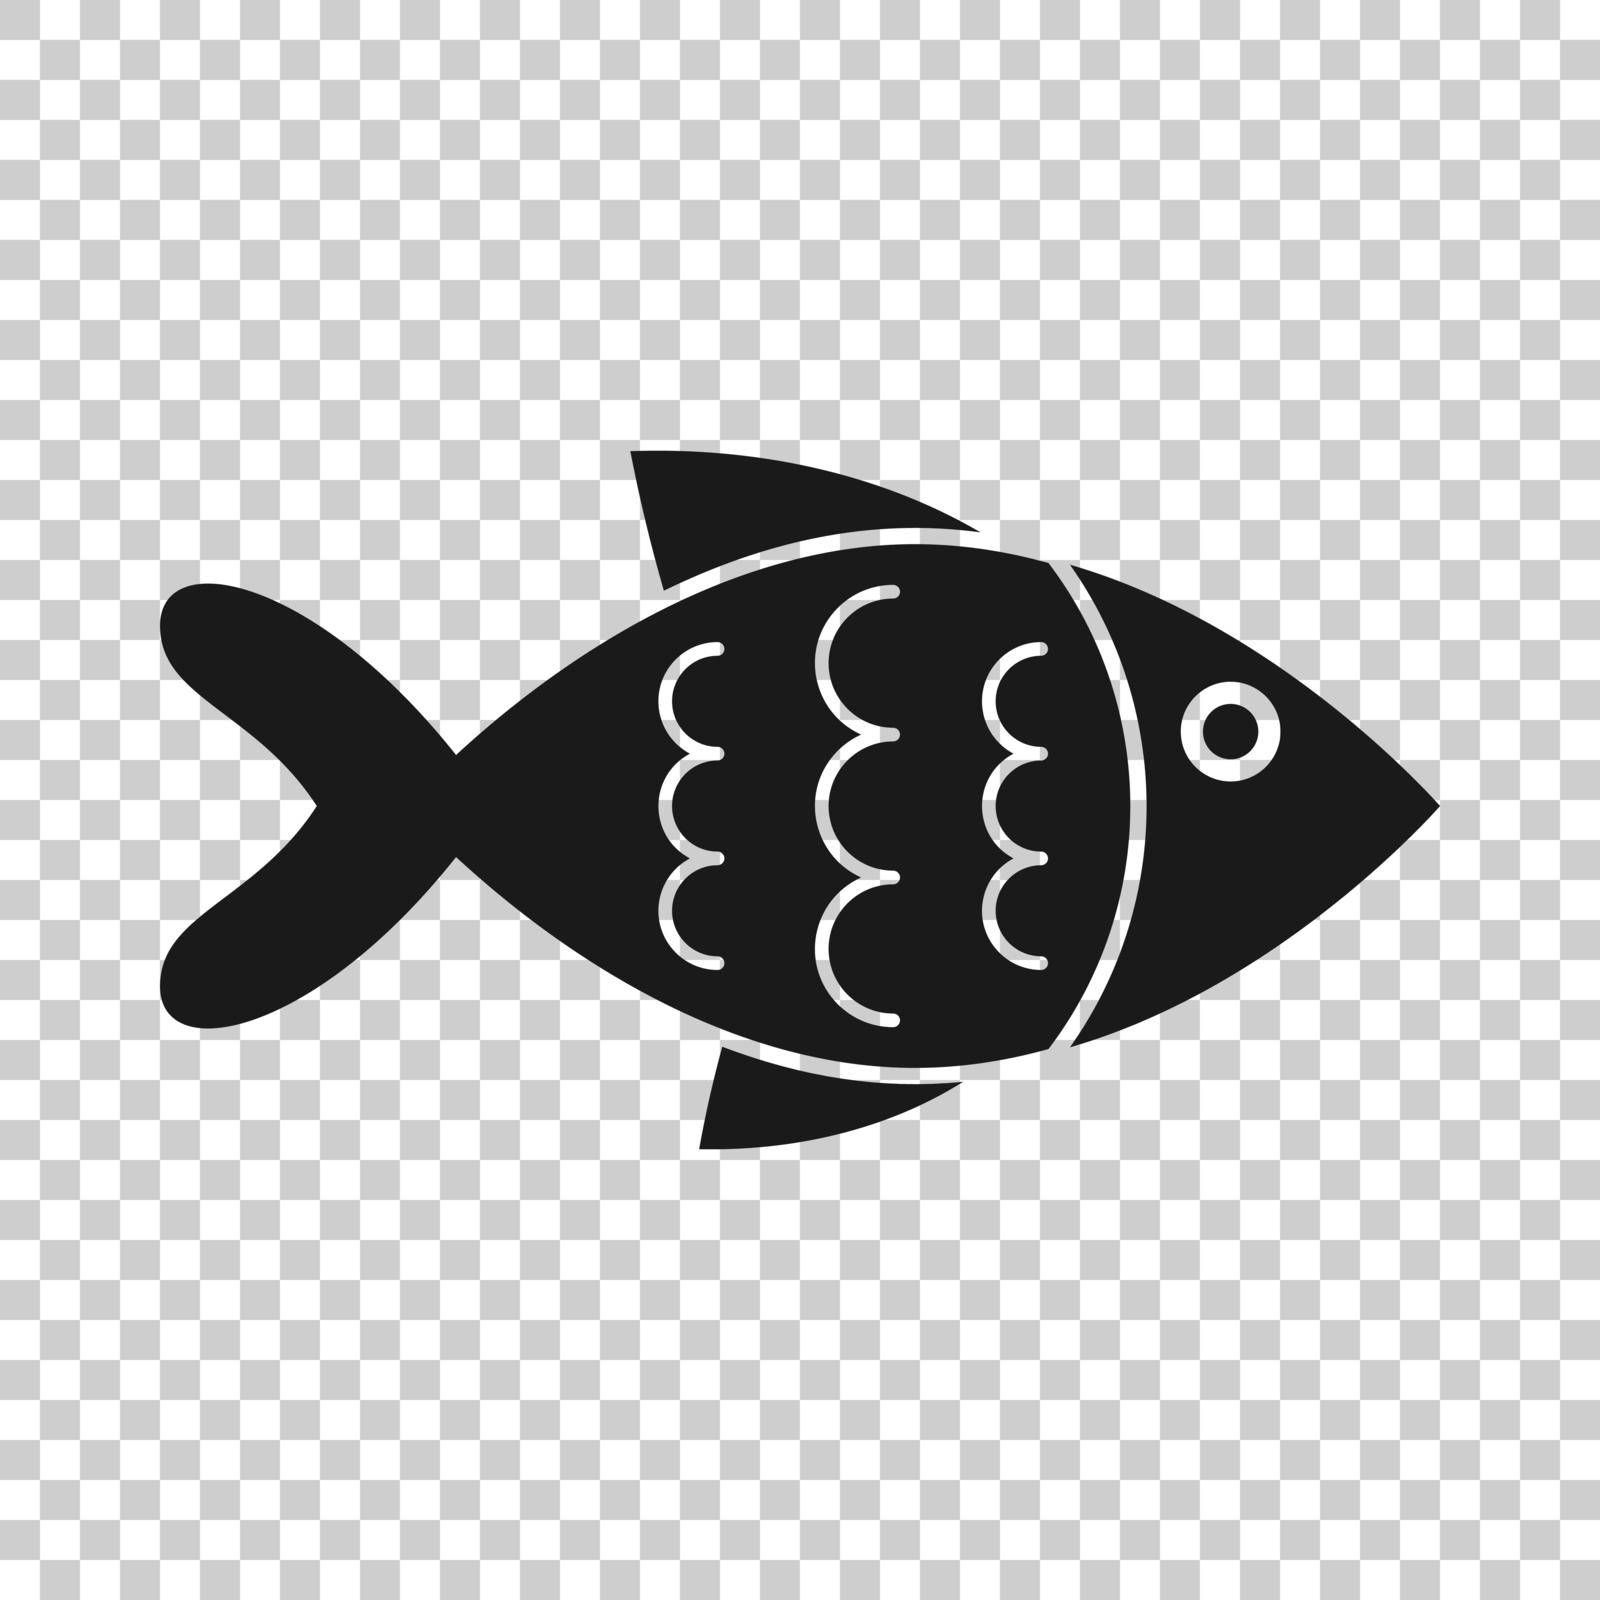 Fish sign icon in transparent style. Goldfish vector illustration on isolated background. Seafood business concept.